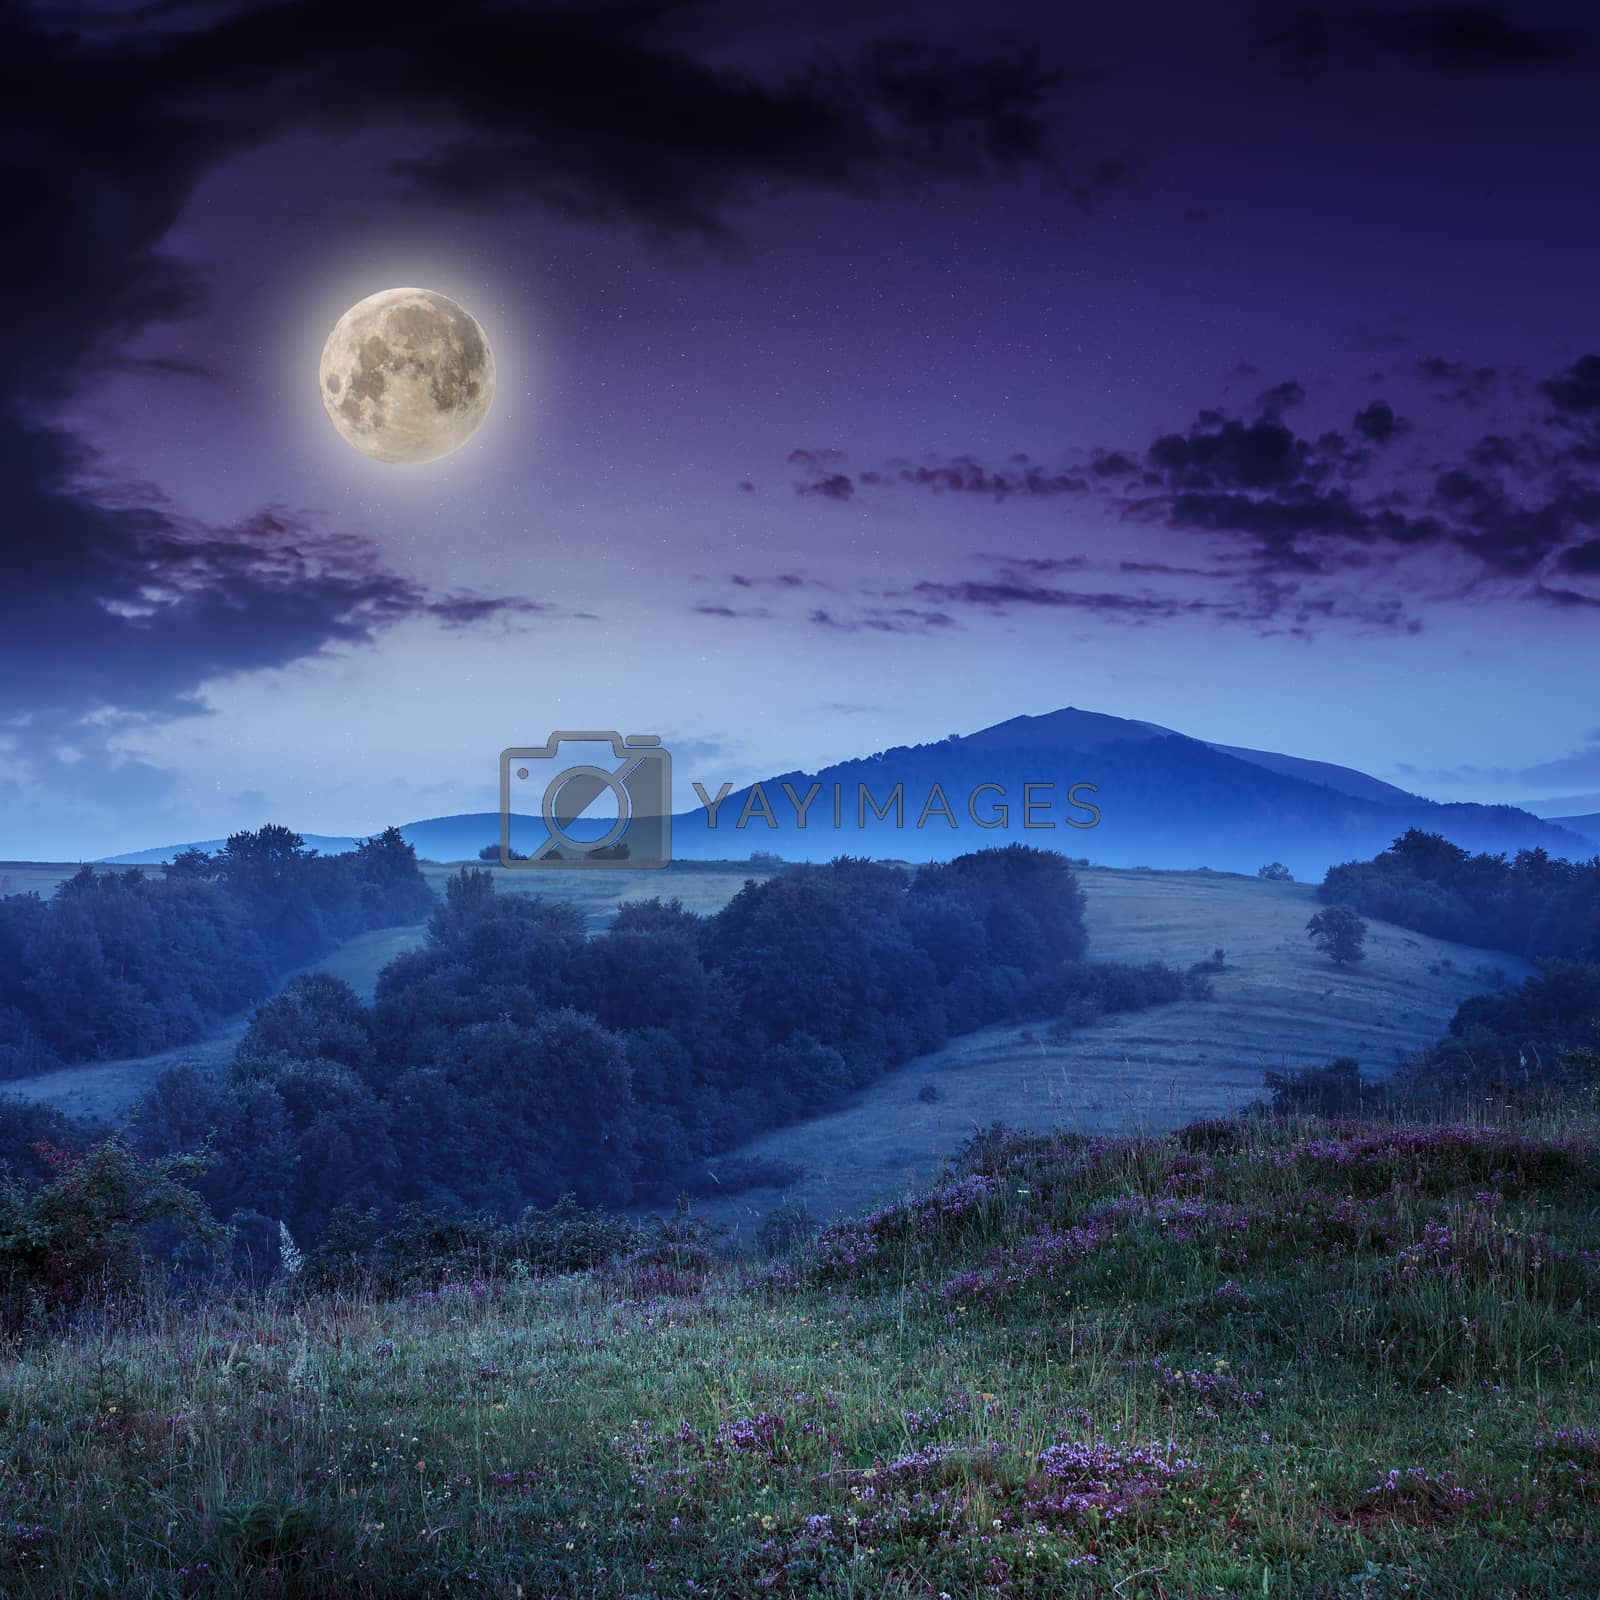 Royalty free image of cold fog on hot sunrise in mountains at night by Pellinni